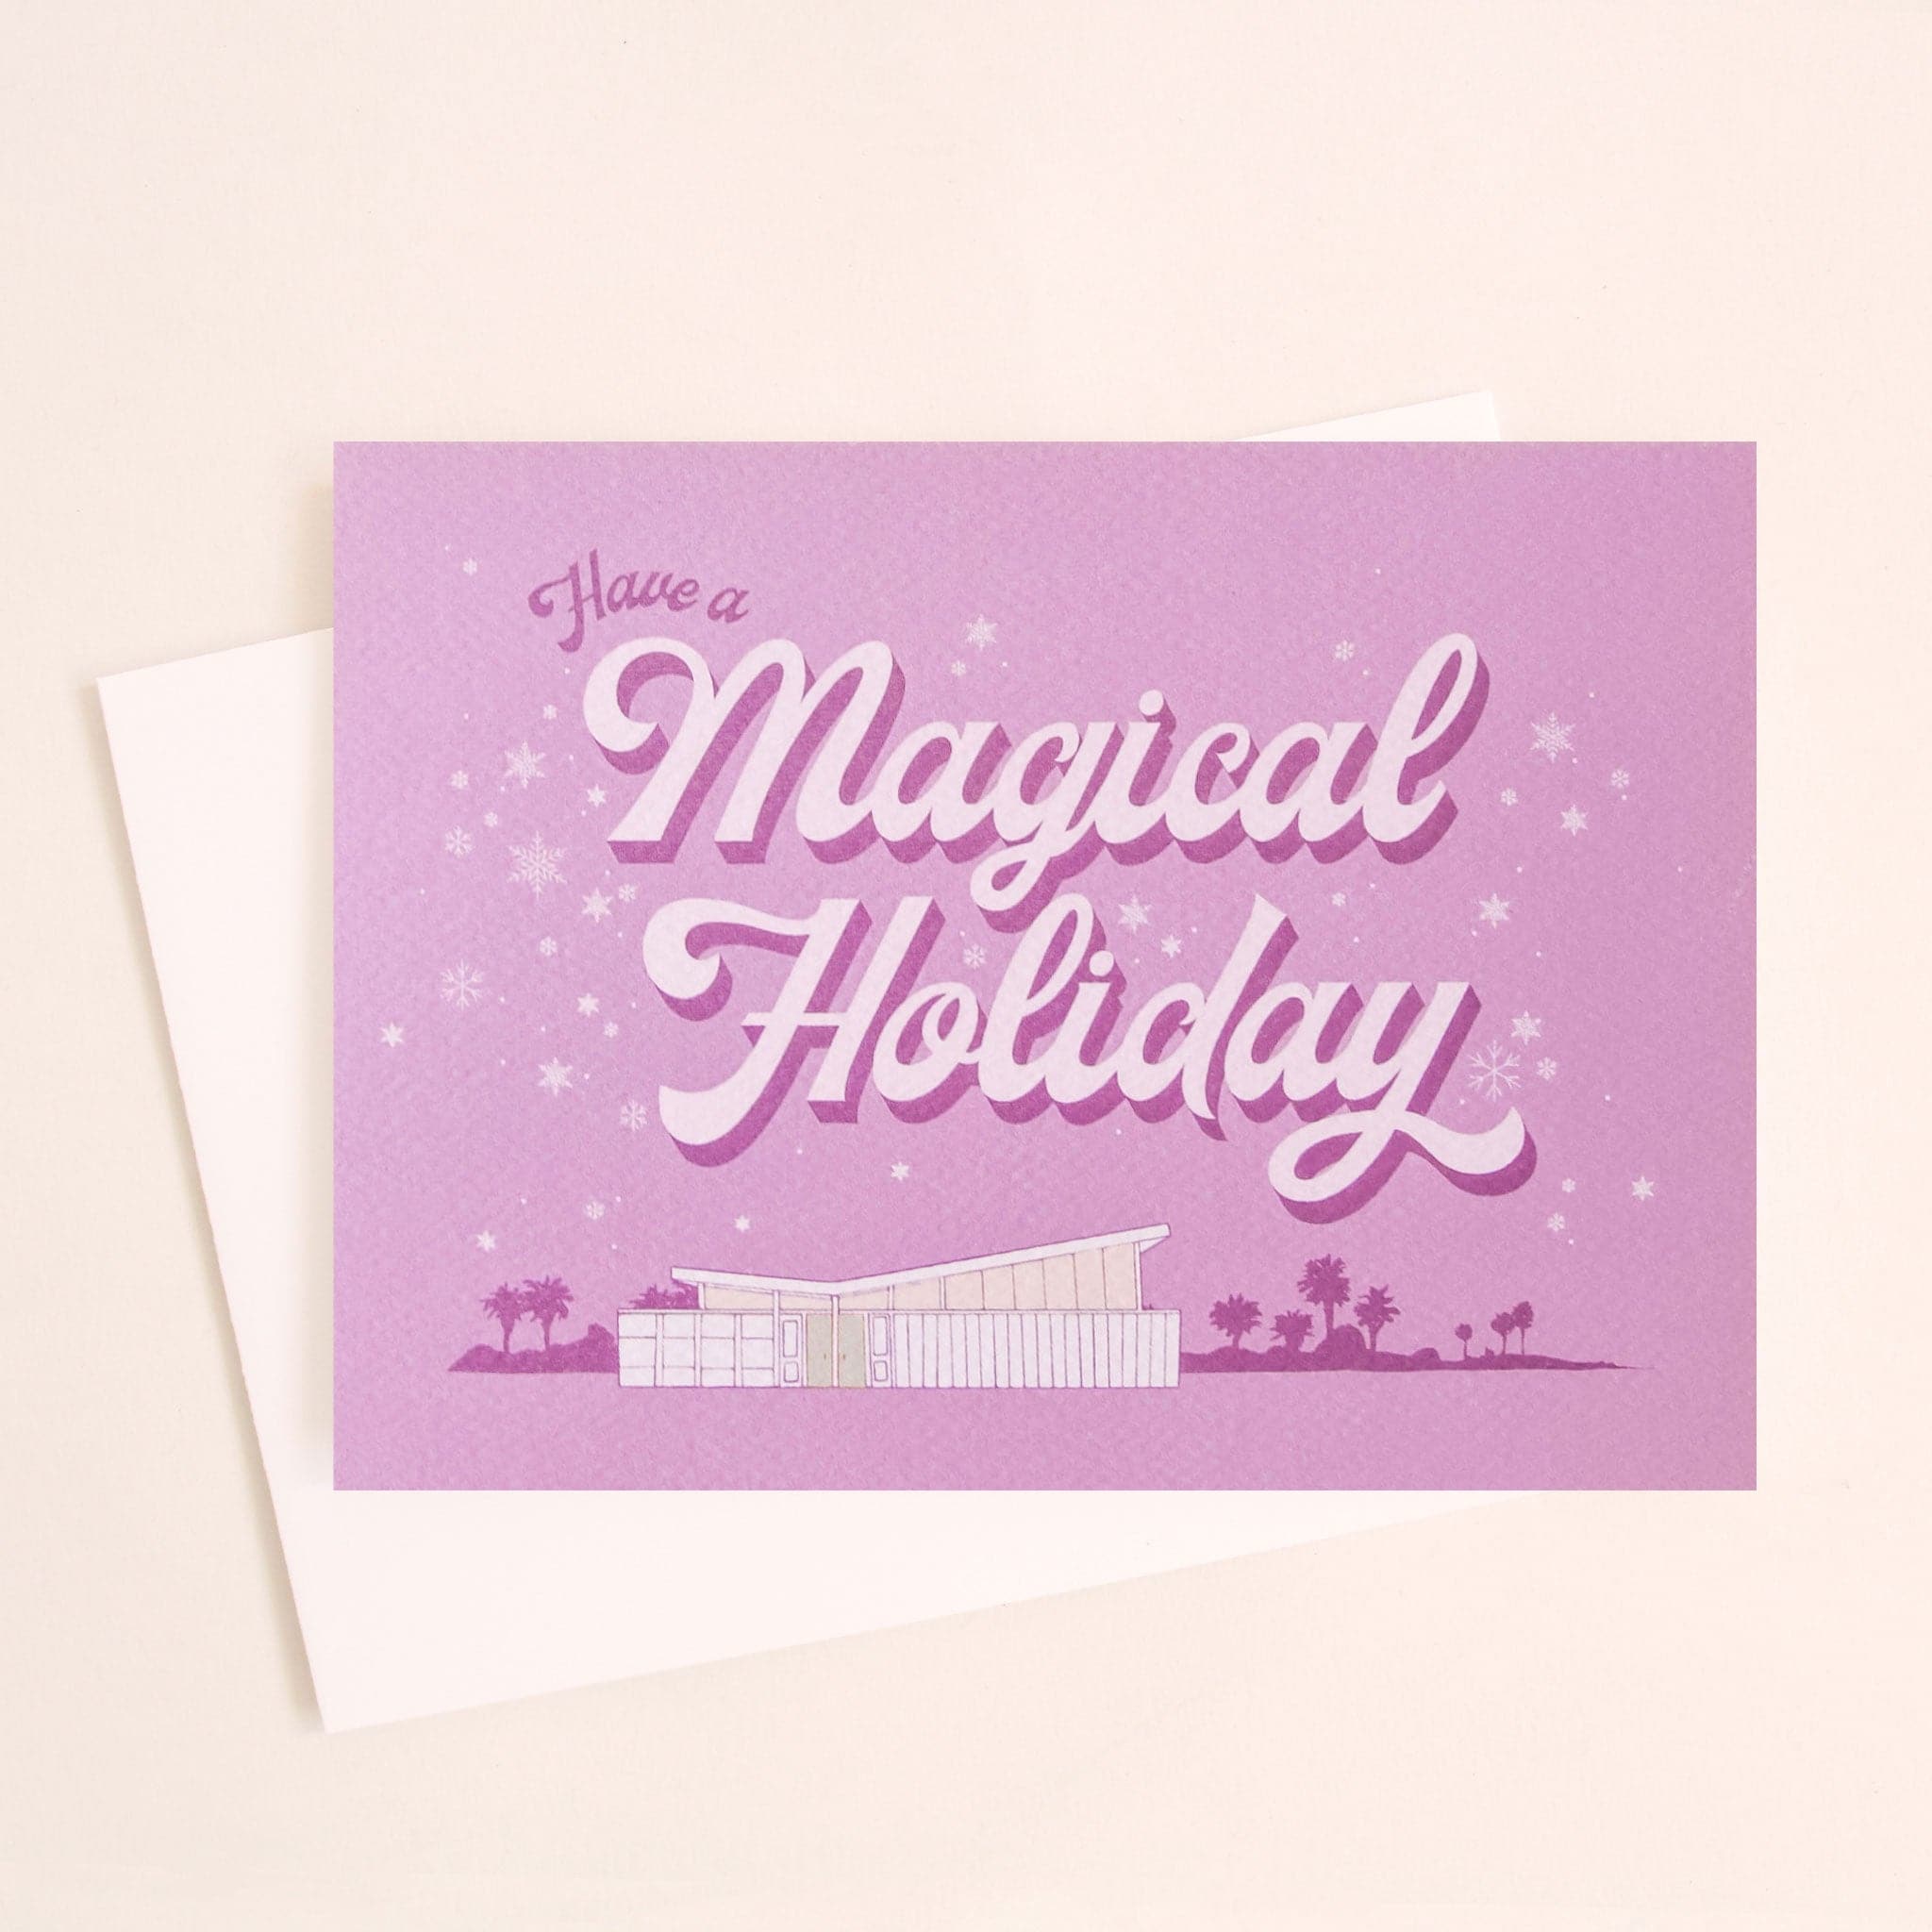 Lilac holiday card that reads &#39;have a a magical holiday&#39; in cursive lettering. Around the text is delicate white snowflakes. Below is a coastal scene of a beach house and palm trees. 